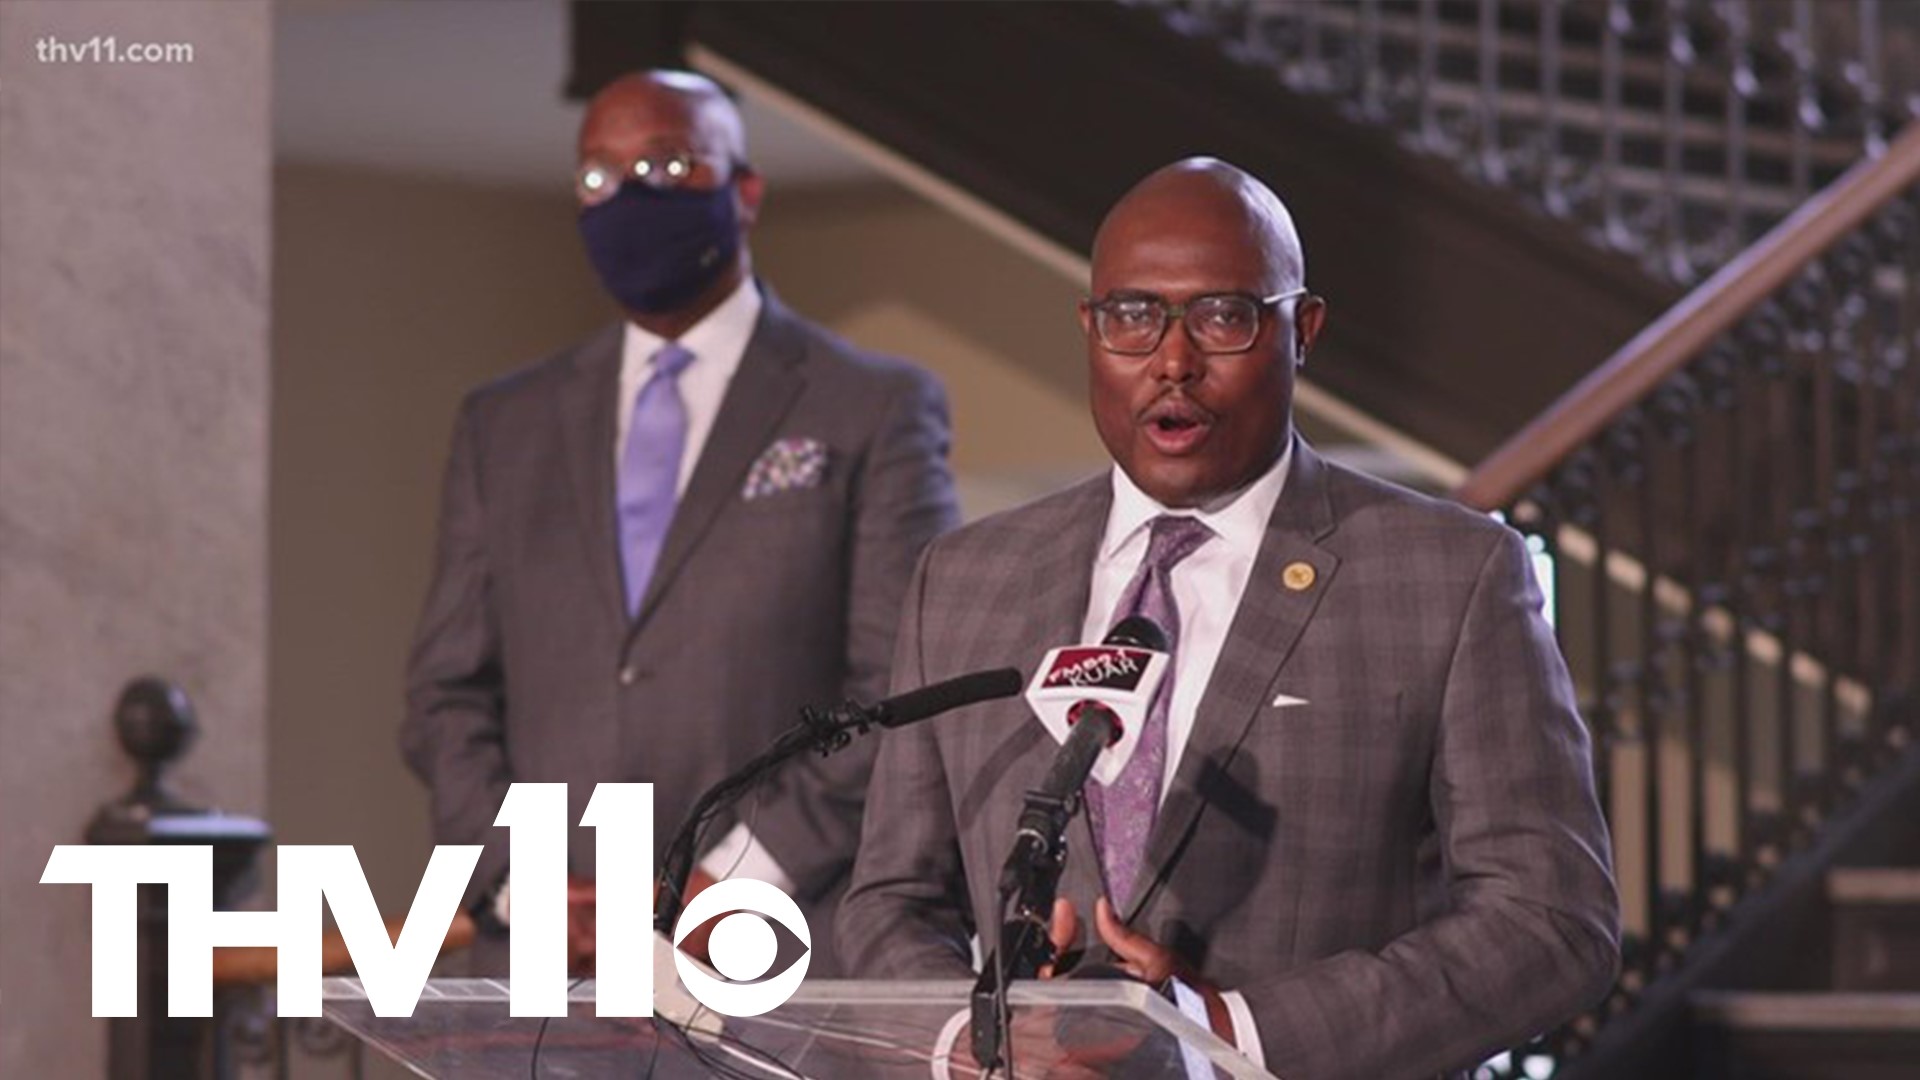 The mayor outlined his plan to curb the violence two weeks after the City of Little Rock declared the recent uptick in violent crime a state of emergency.